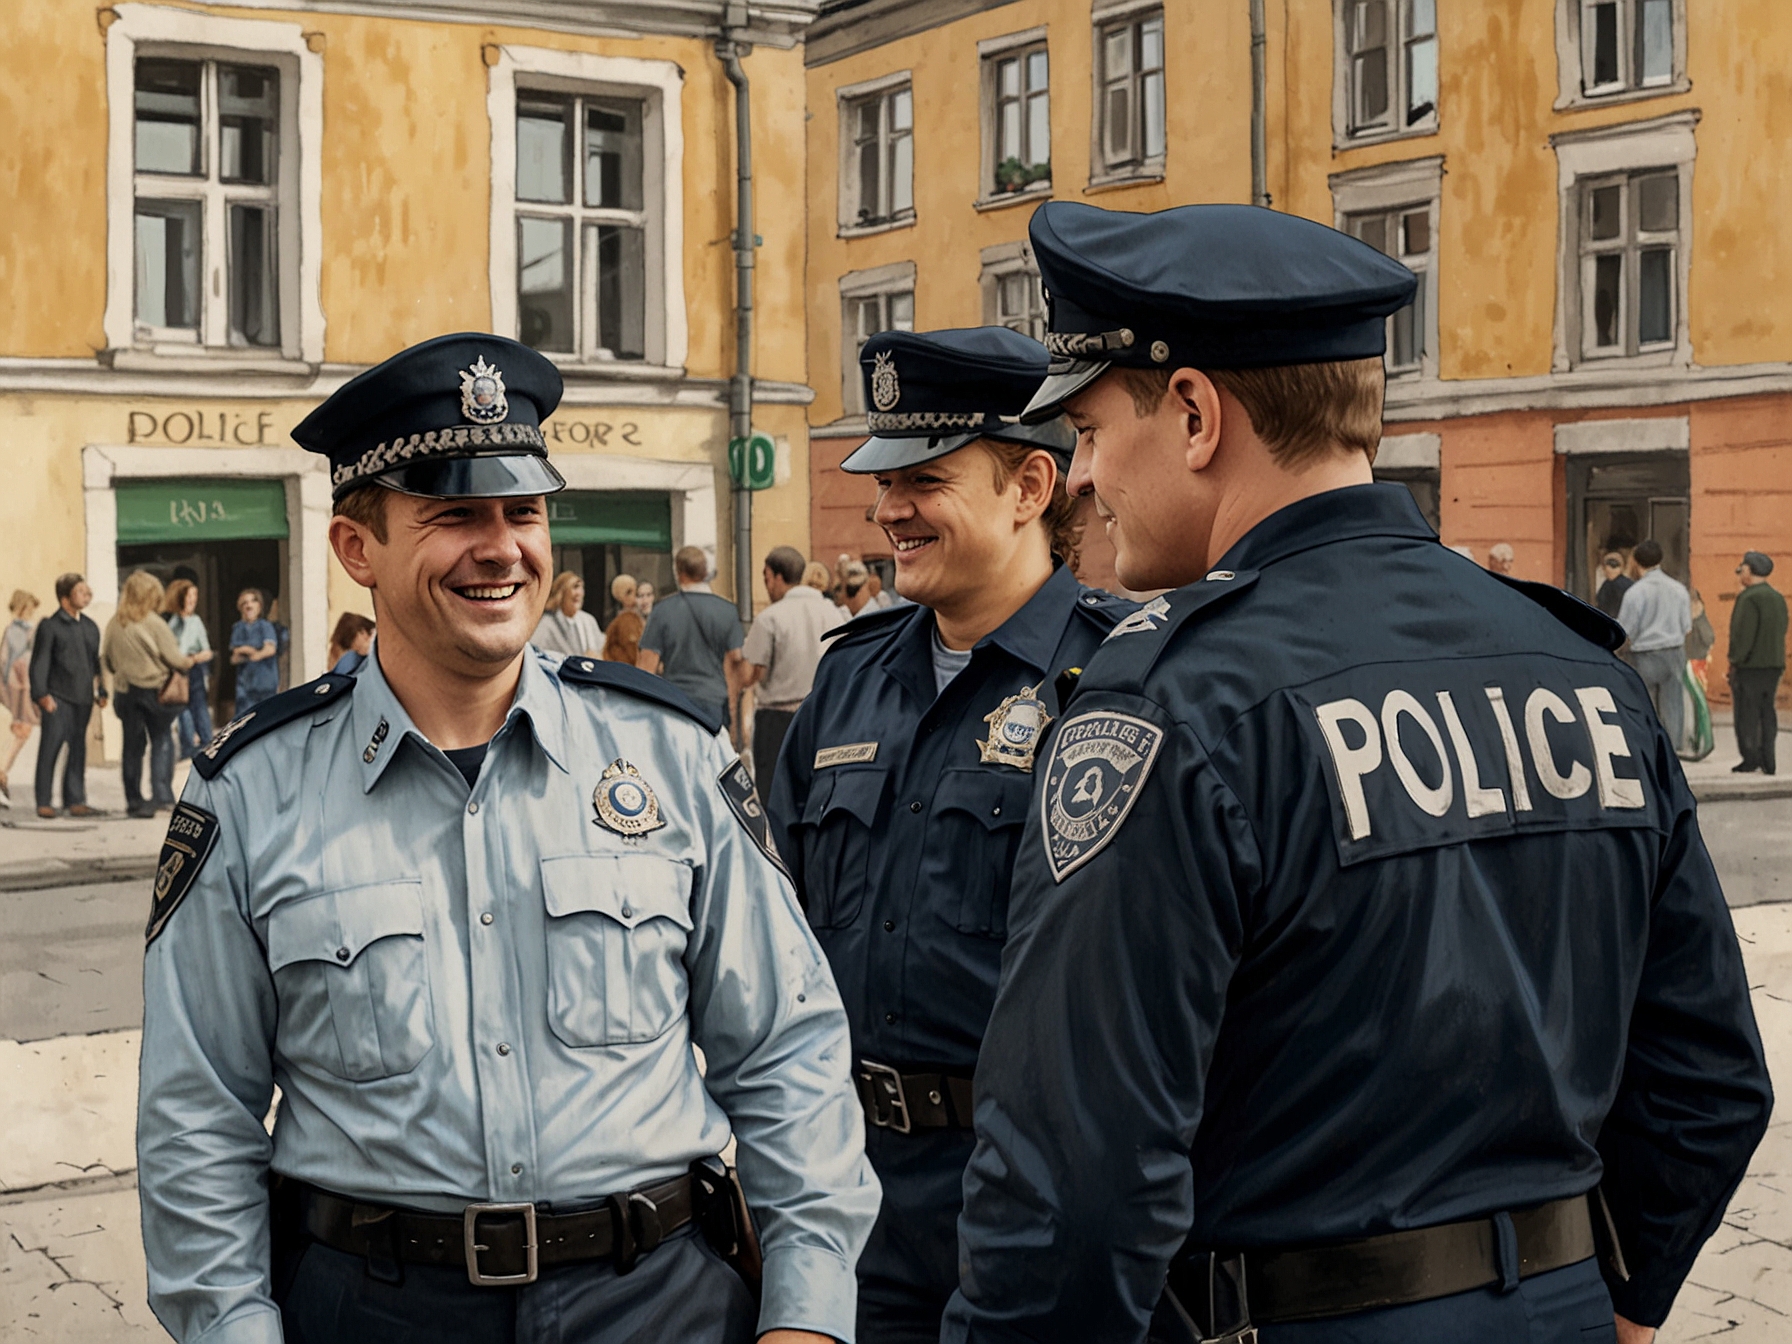 Community policing in action in Copenhagen, showing a friendly interaction between local police officers and residents, highlighting the trust and cooperation that enhance public safety.